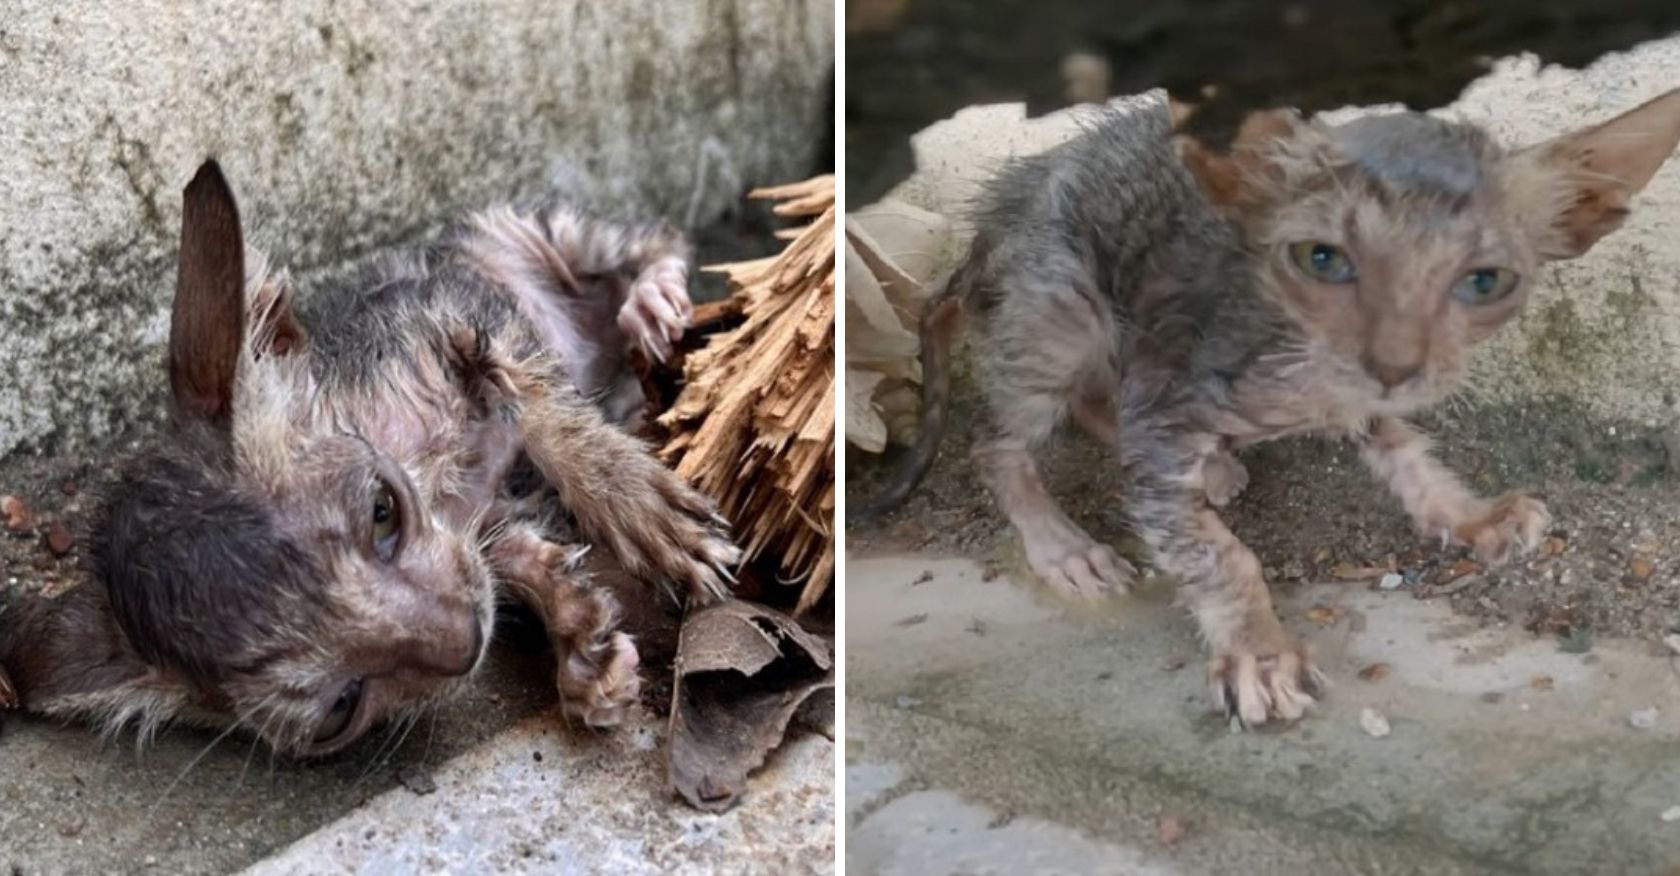 The kitten was found emaciated, exhausted, hungry, lucky to be rescued by a kind woman who gave this poor cat love and warmth